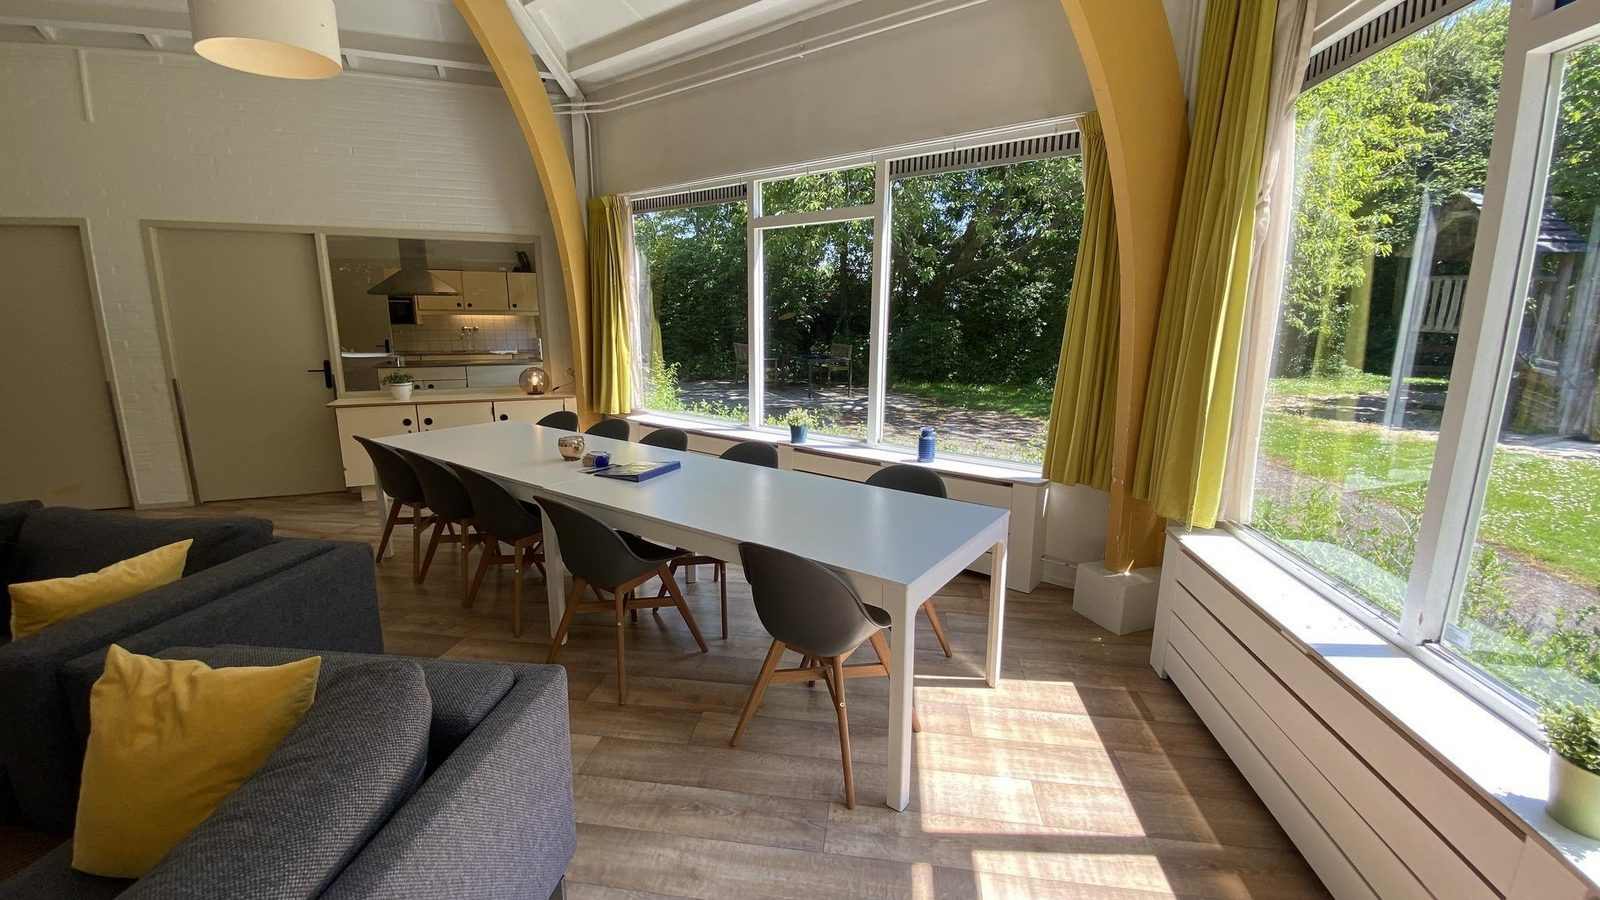 VZ1013 Detached holiday home in Oostkapelle